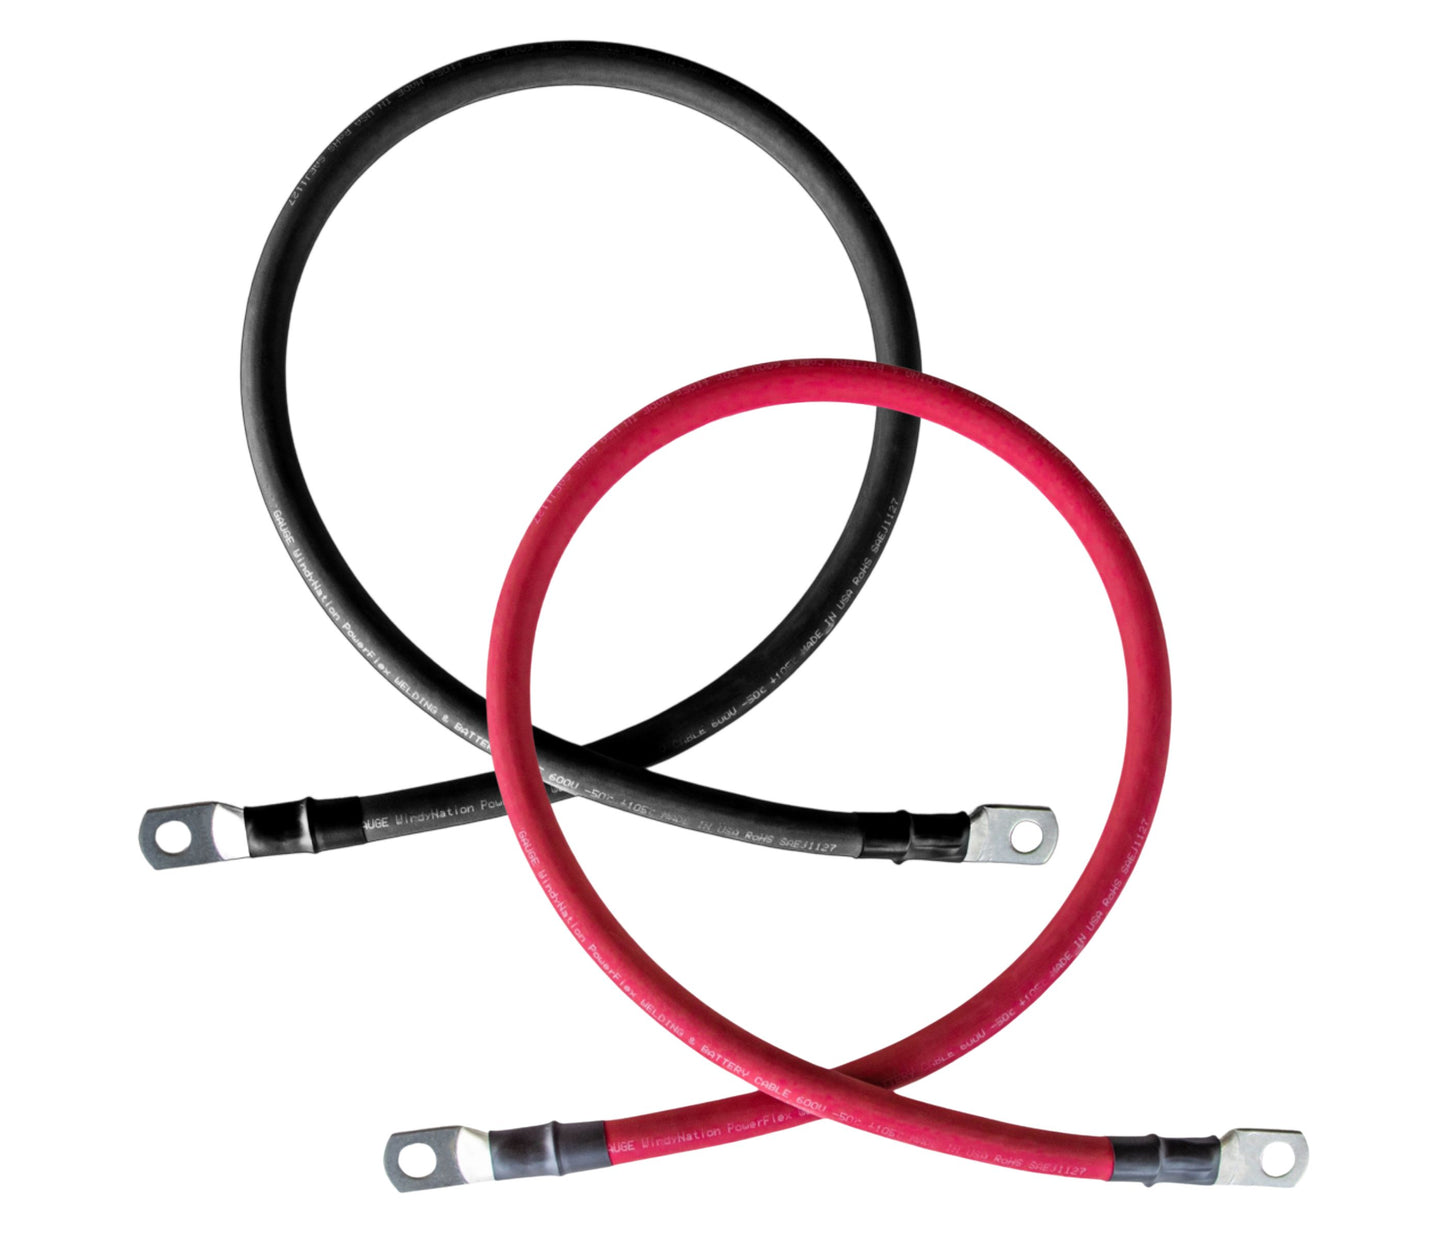 6 Gauge (AWG) Black and Red Pure Copper Battery Cable Wire with Lug Connector Ring Terminals